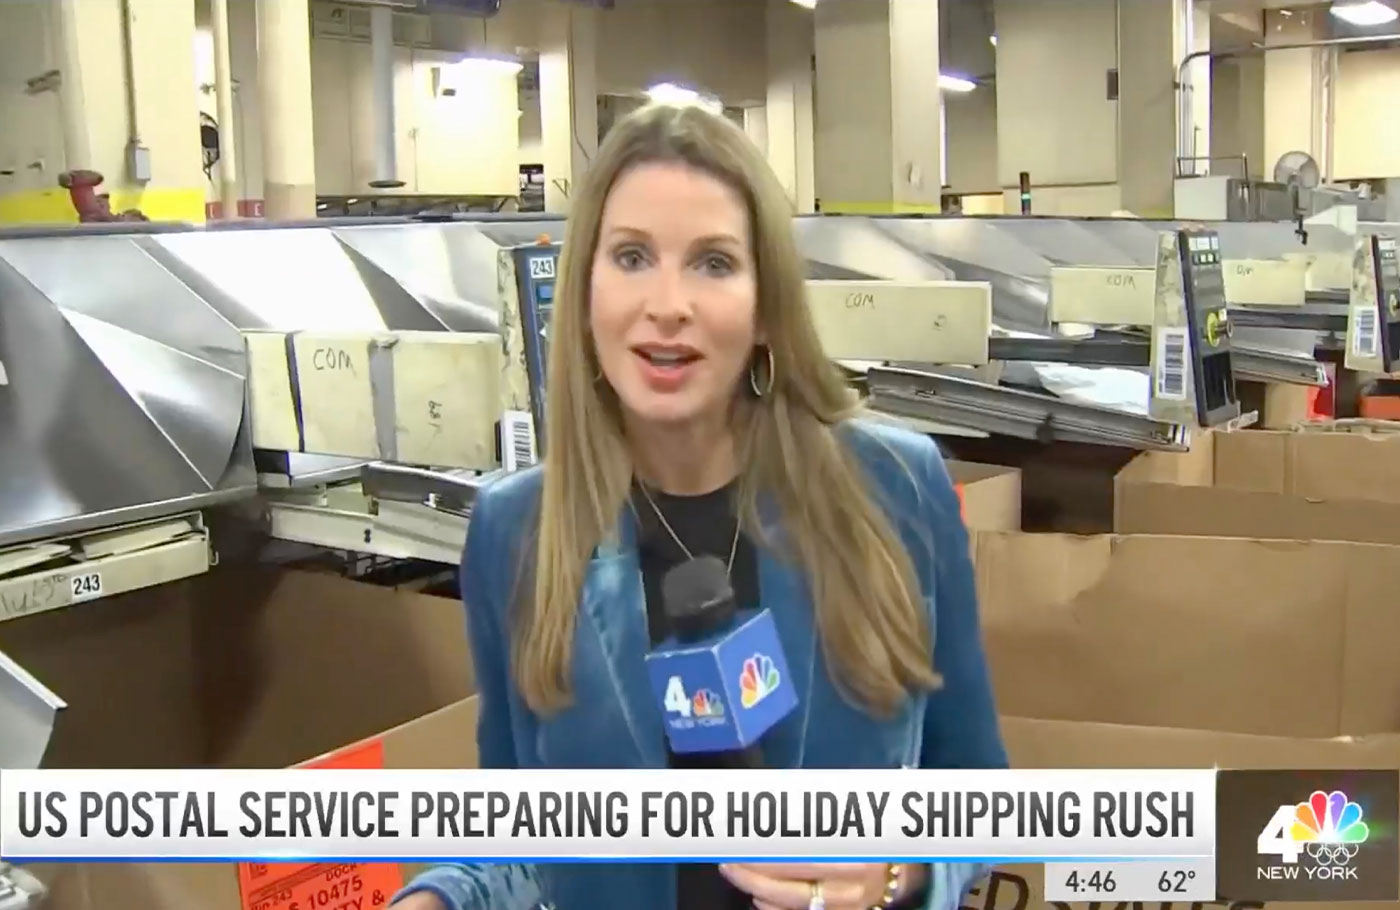 Jen Maxfield reports: U.S. Postal Service Prepares for Holiday Shipping Rush